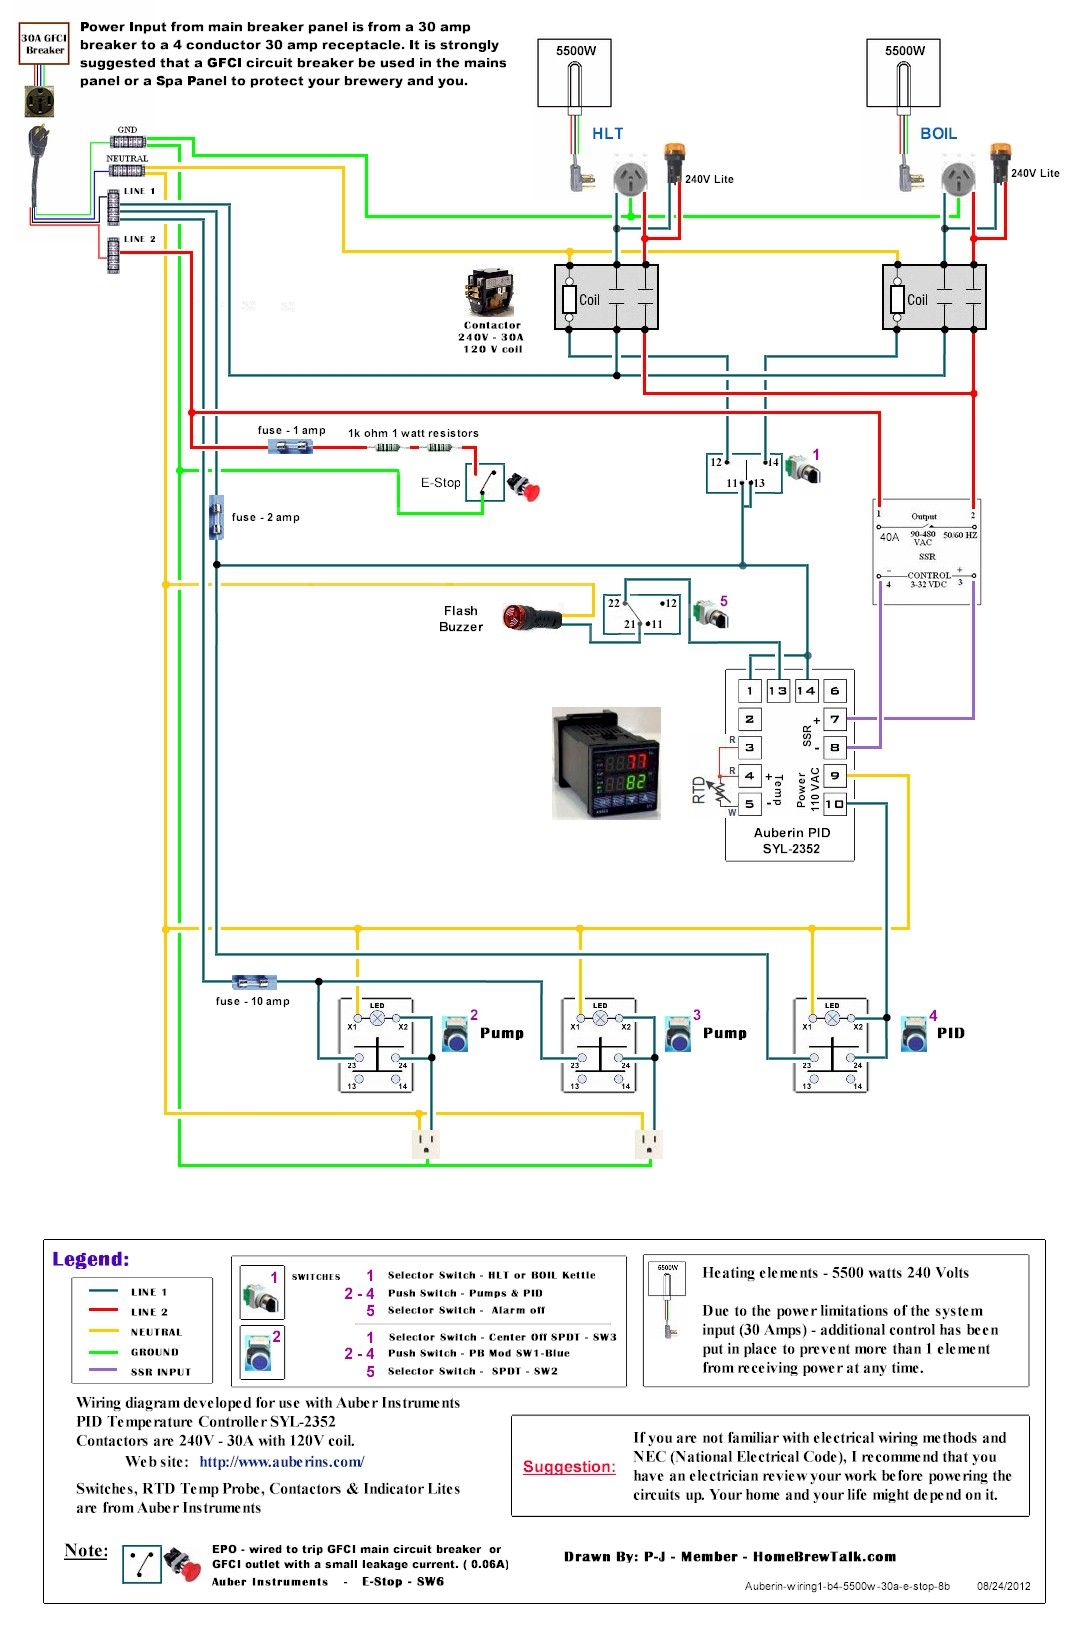 220V 30A Wiring Diagram Help - Page 2 - Home Brew Forums | *brewery - 220 Wiring Diagram